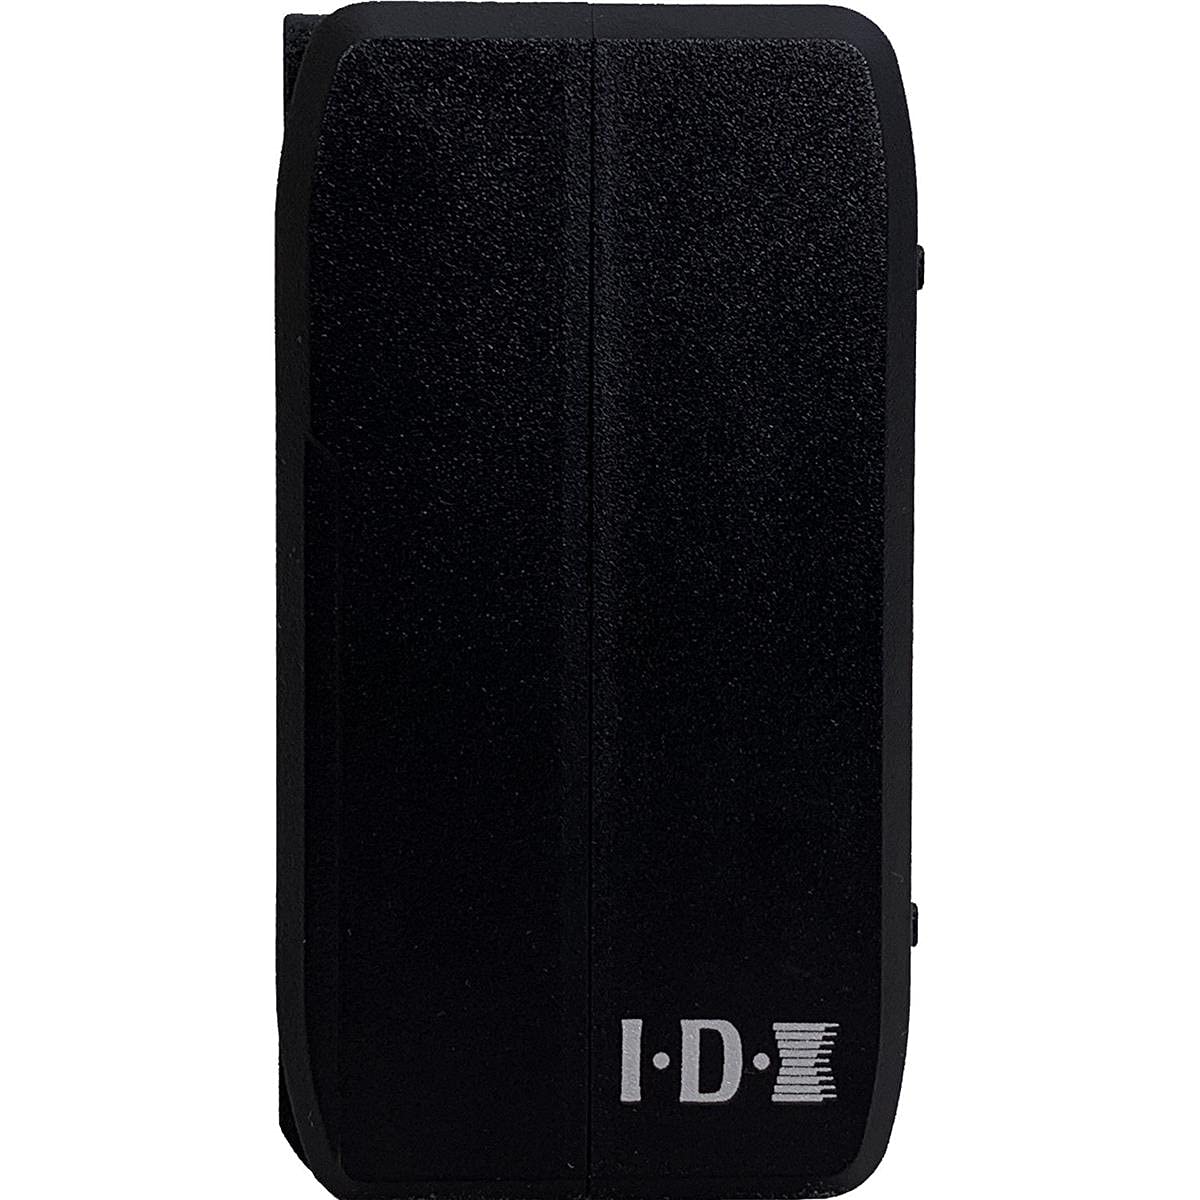 IDX IMICRO-98 Compact 97Wh Lithium-Ion Battery with Two D-Tap Outputs